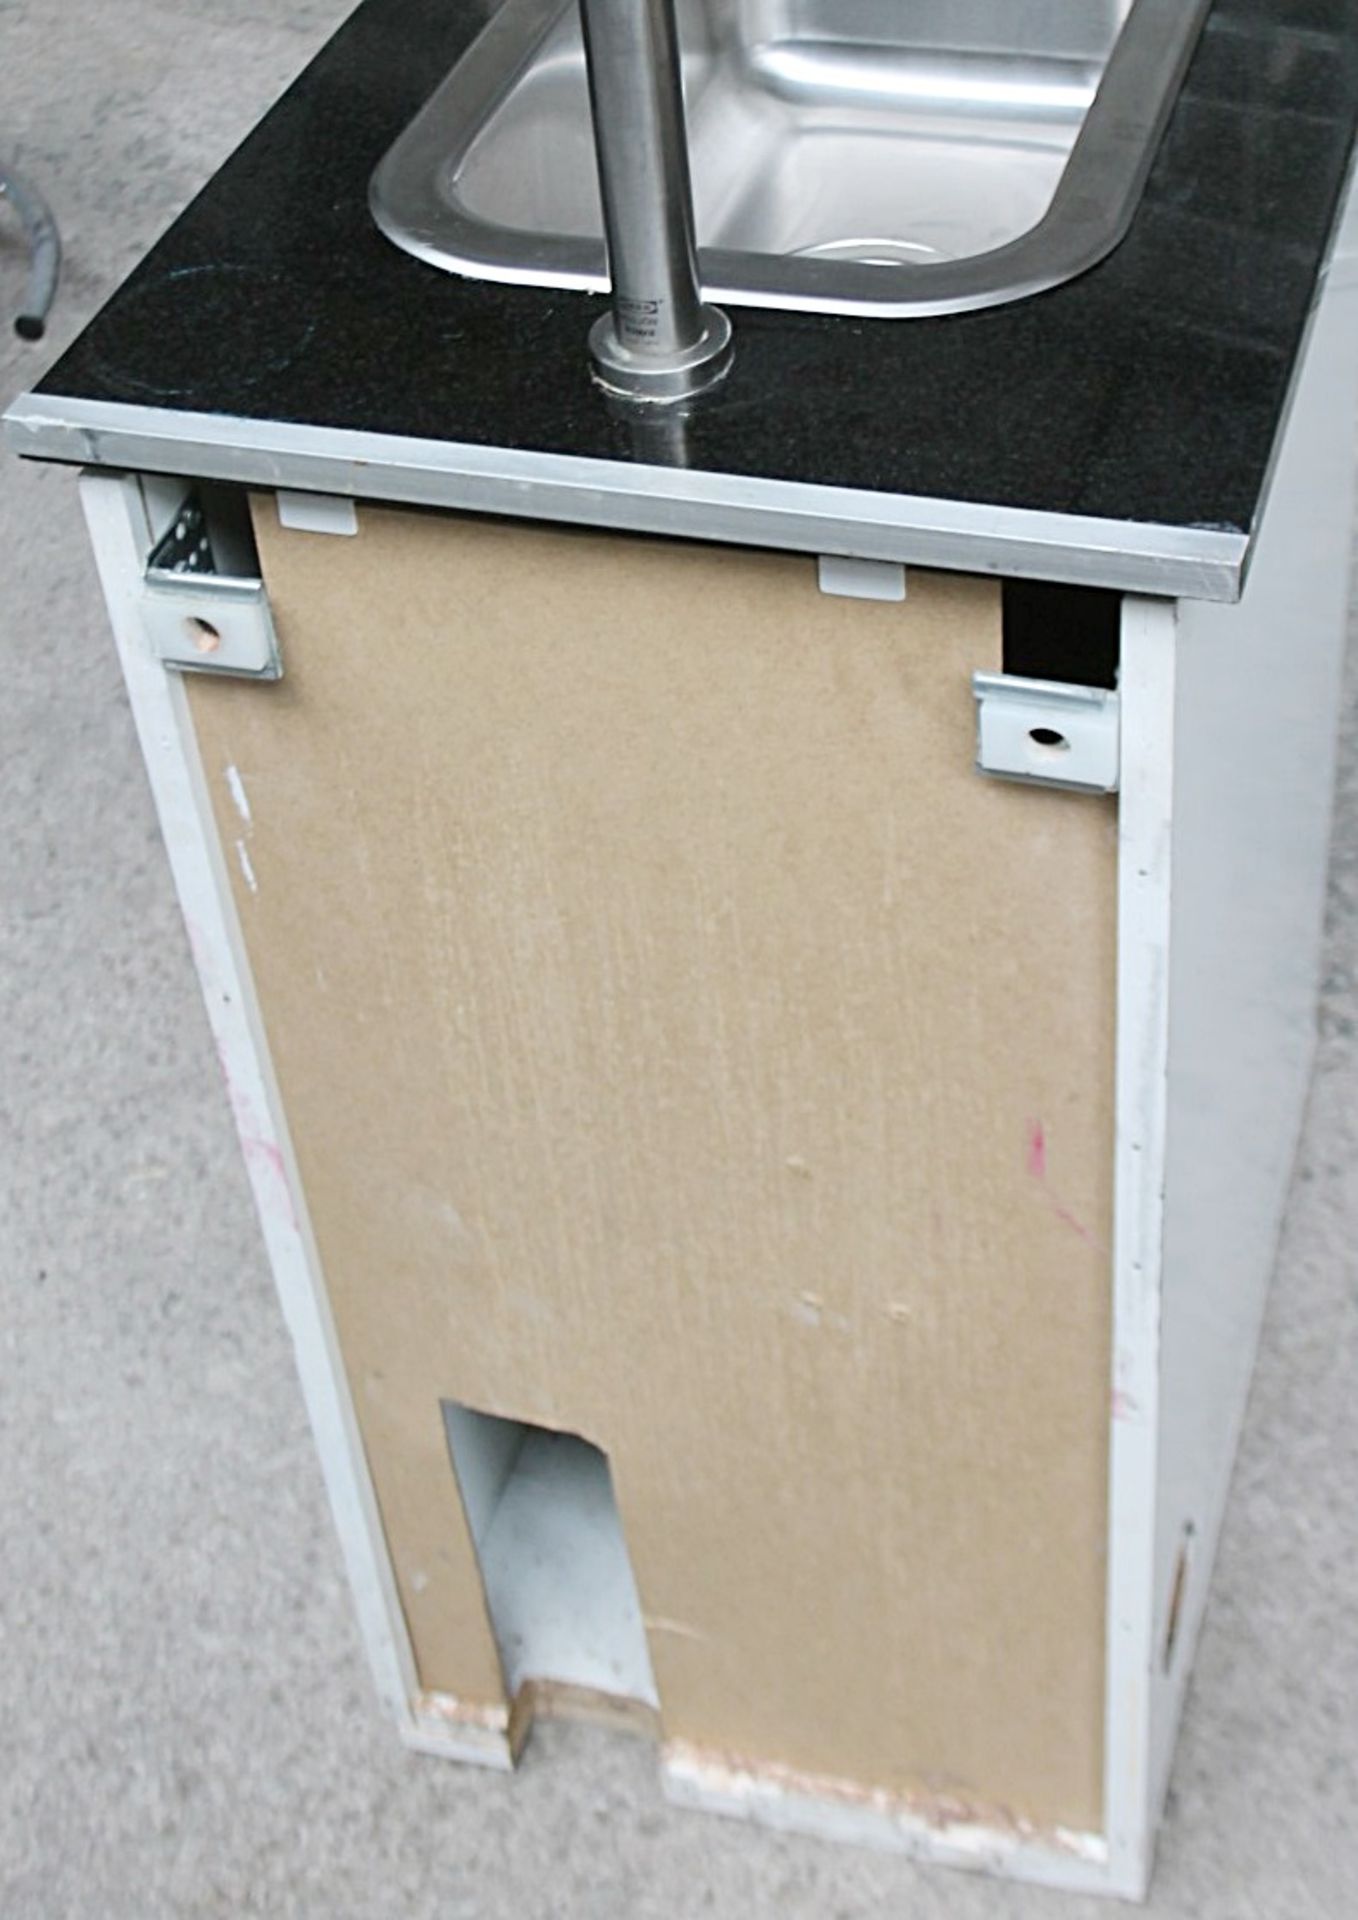 1 x Marble Topped Sink Unit Wash Station - Recently Removed From A Boutique Hair Salon - Ref: - Image 4 of 7